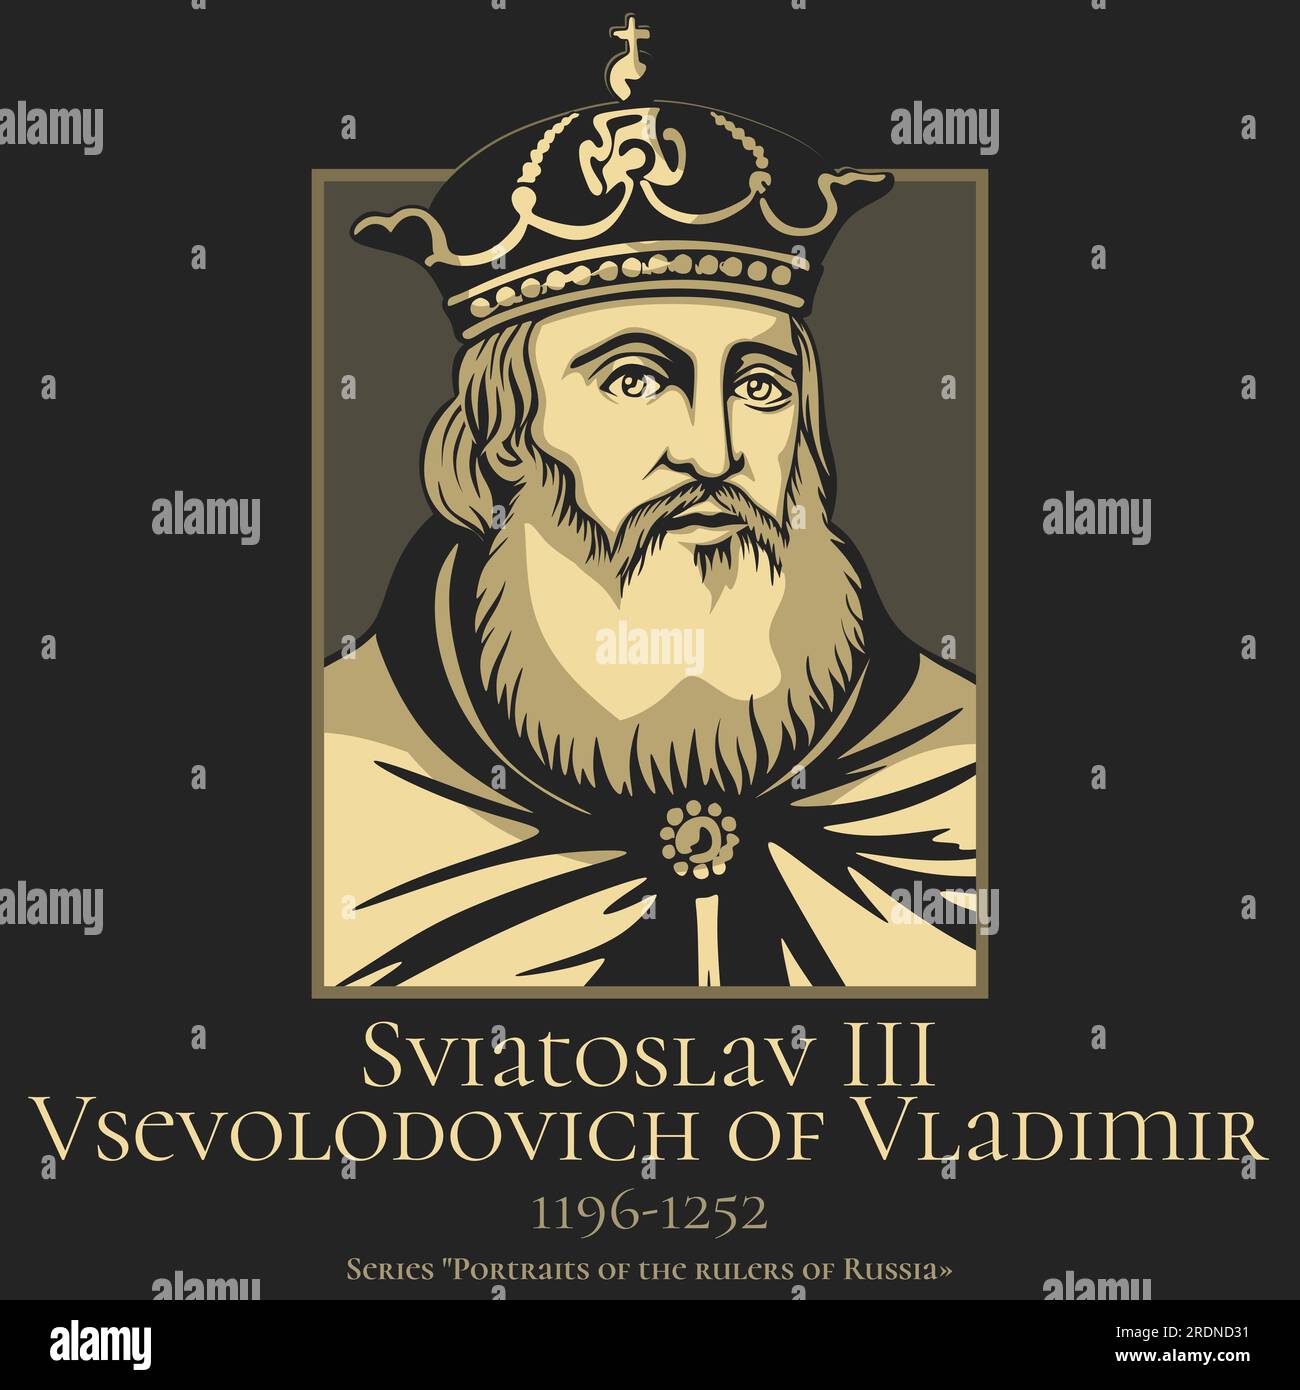 Portrait of the rulers of Russia. Sviatoslav III Vsevolodovich of Vladimir (1196-1252) was the Prince of Novgorod and Grand Prince of Vladimir-Suzdal. Stock Vector